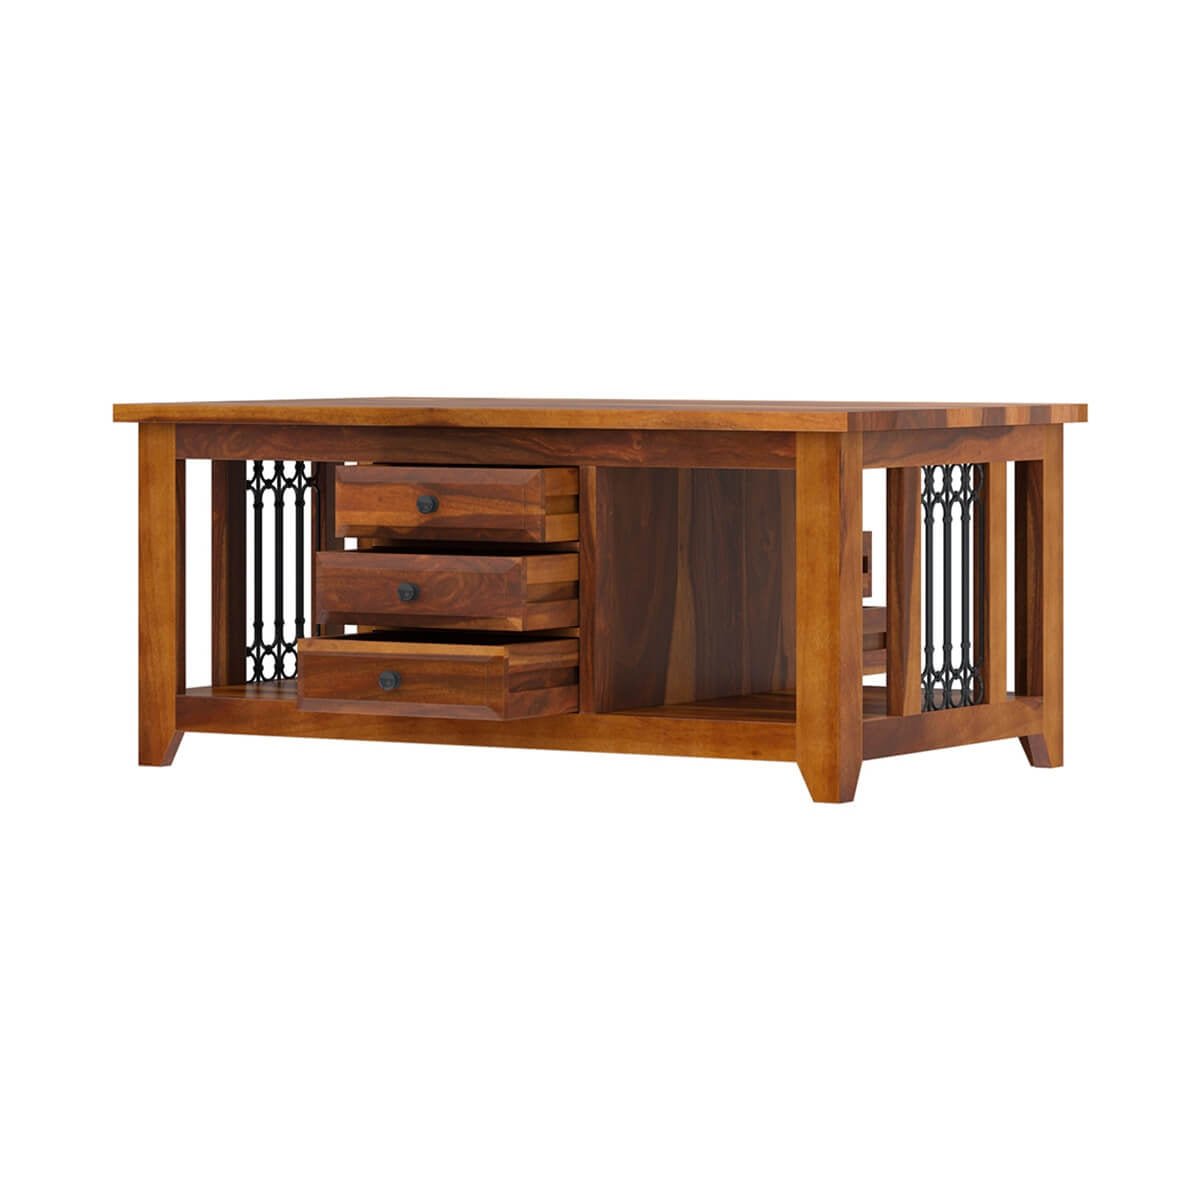 Golden Gate Iron Grill Rustic Solid Wood Coffee Table With 6 Drawers